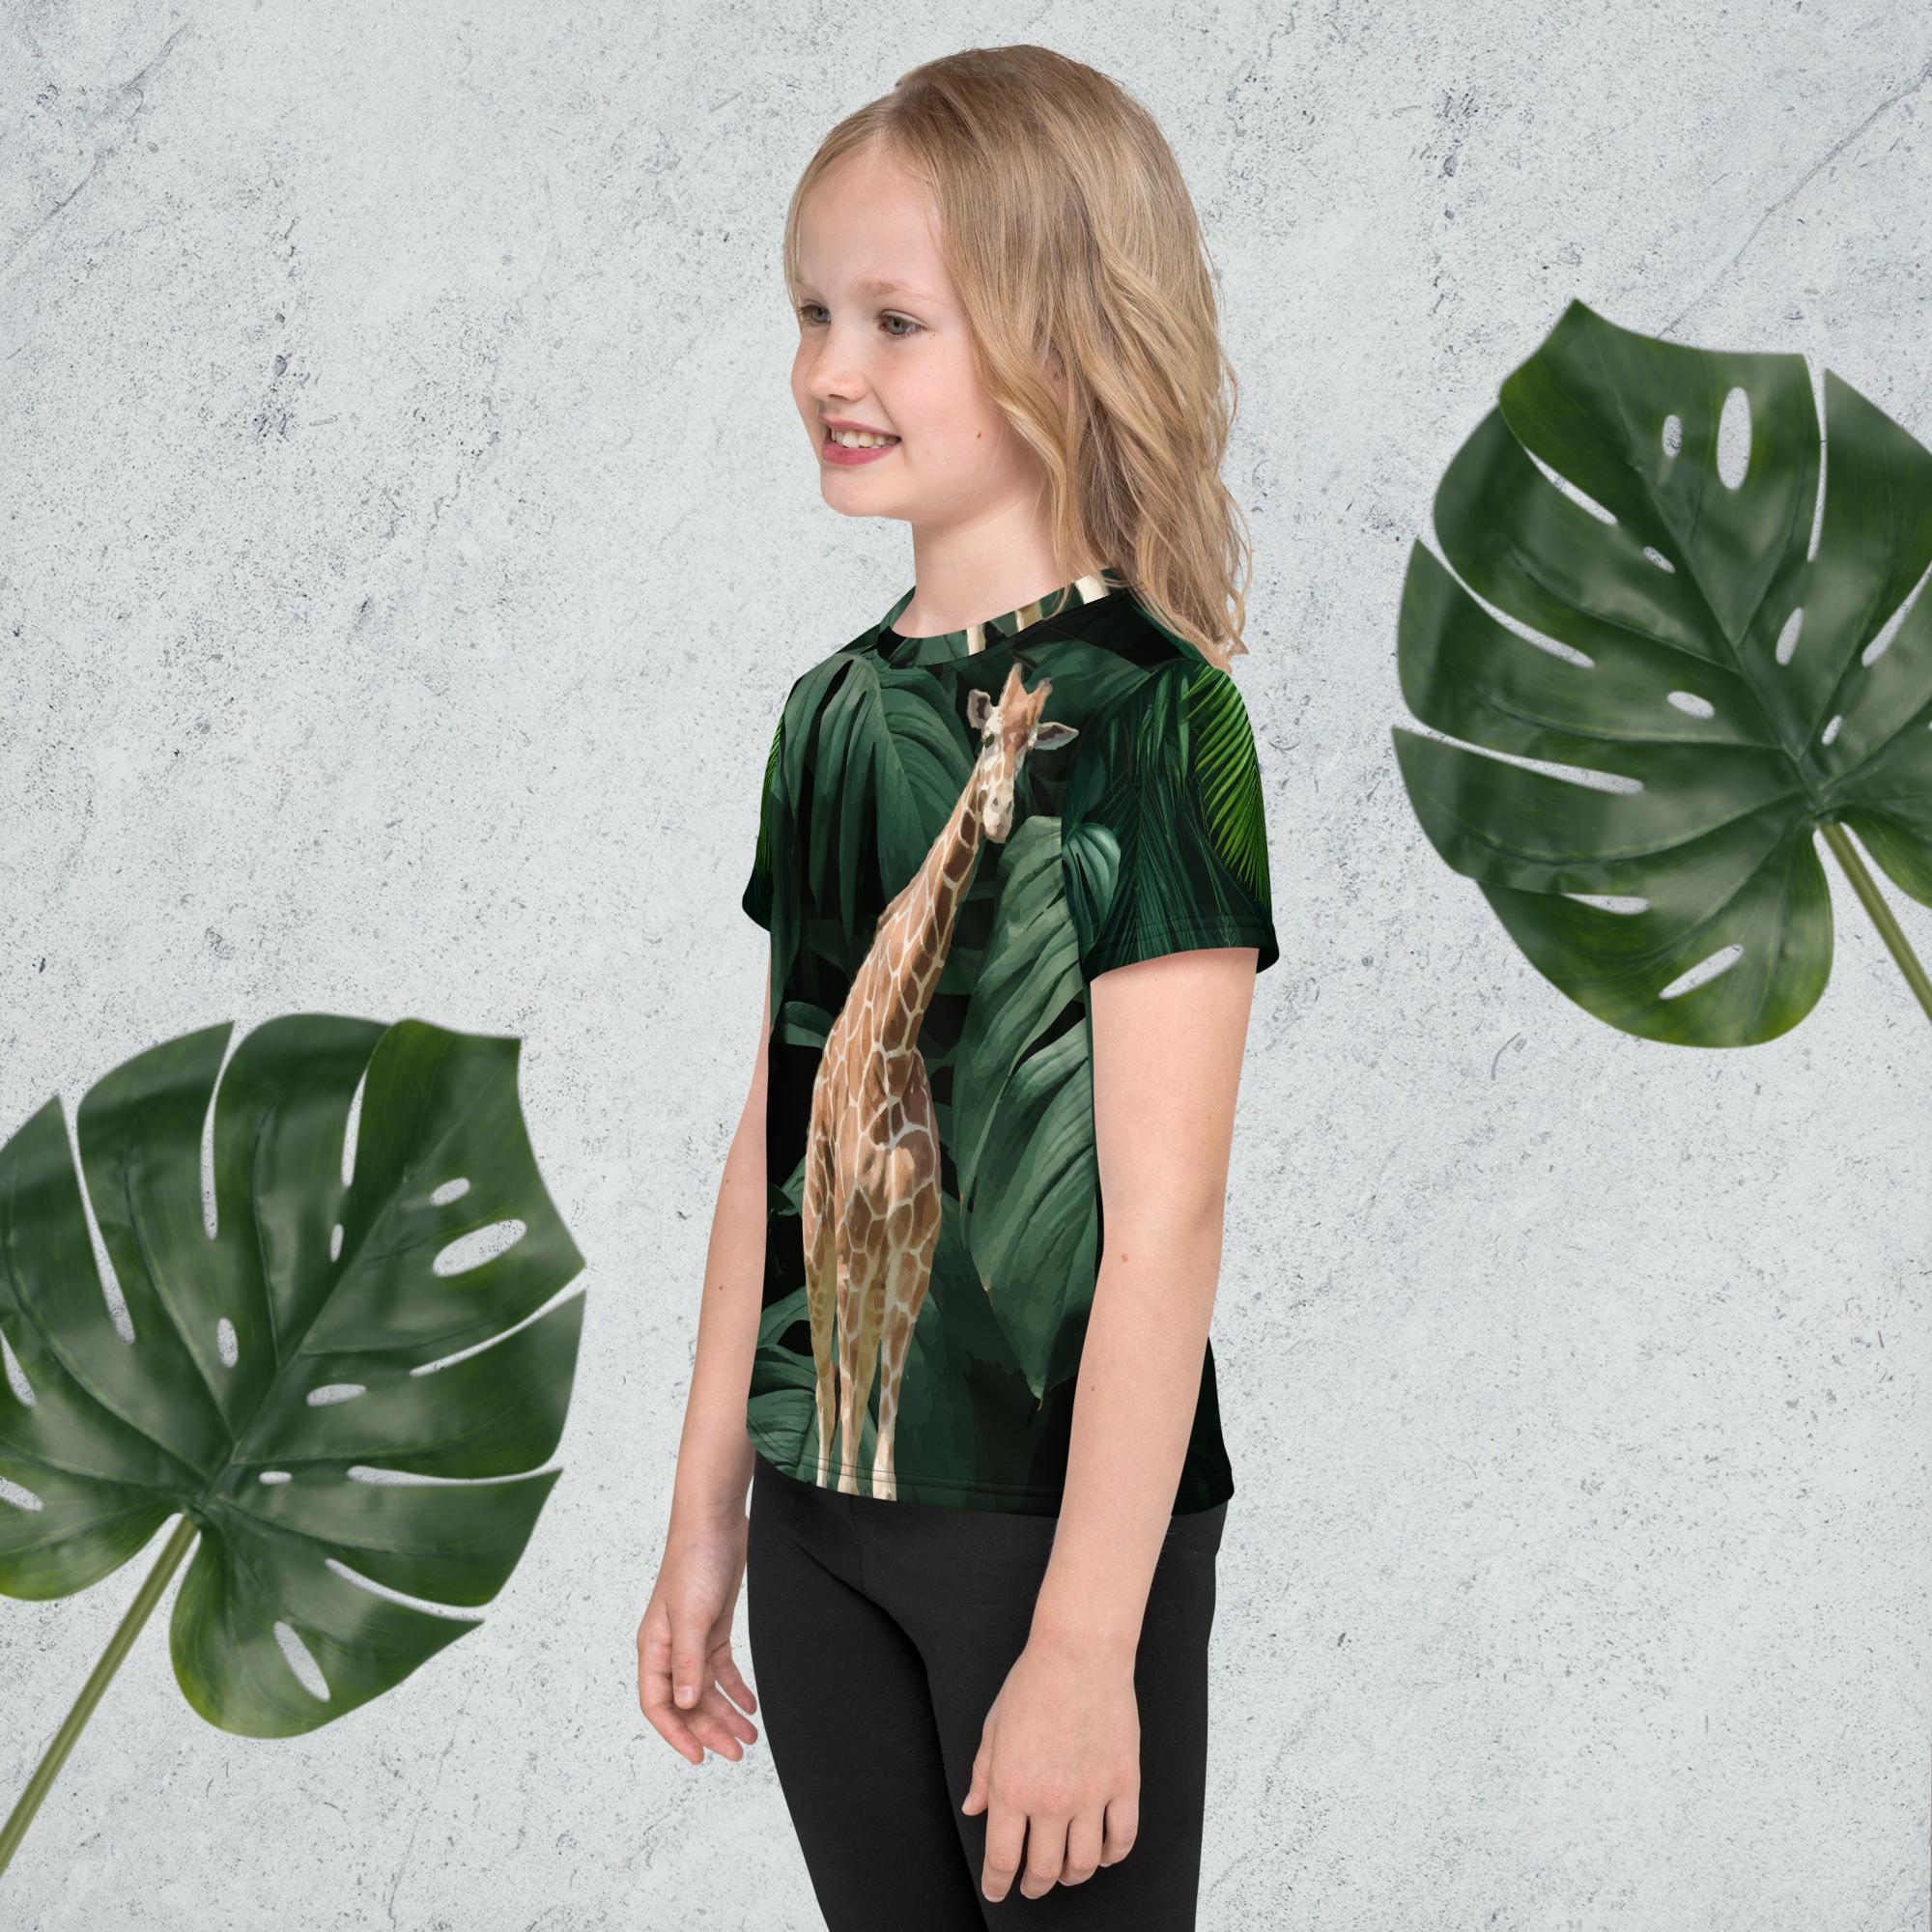 Kid's Giraffe Surrounded by Greenery Printed T-shirt